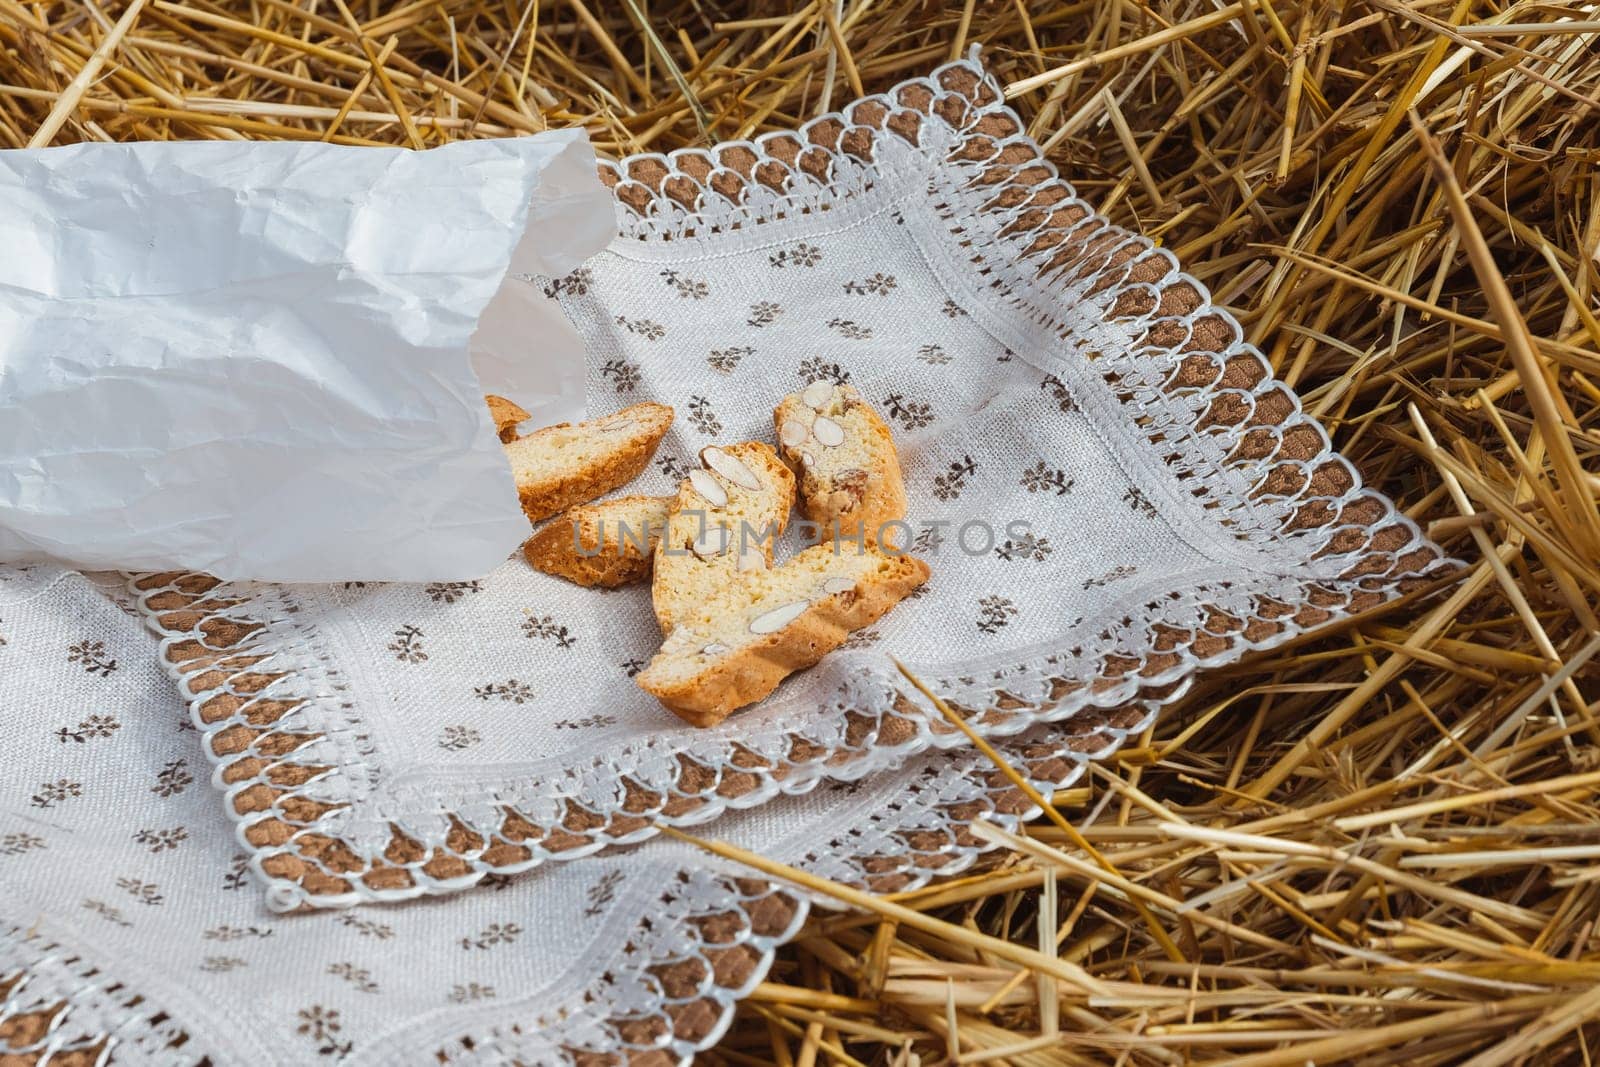 Almond cookies crackers with pieces of nuts fell out of a paper bag on a napkin lying on the straw